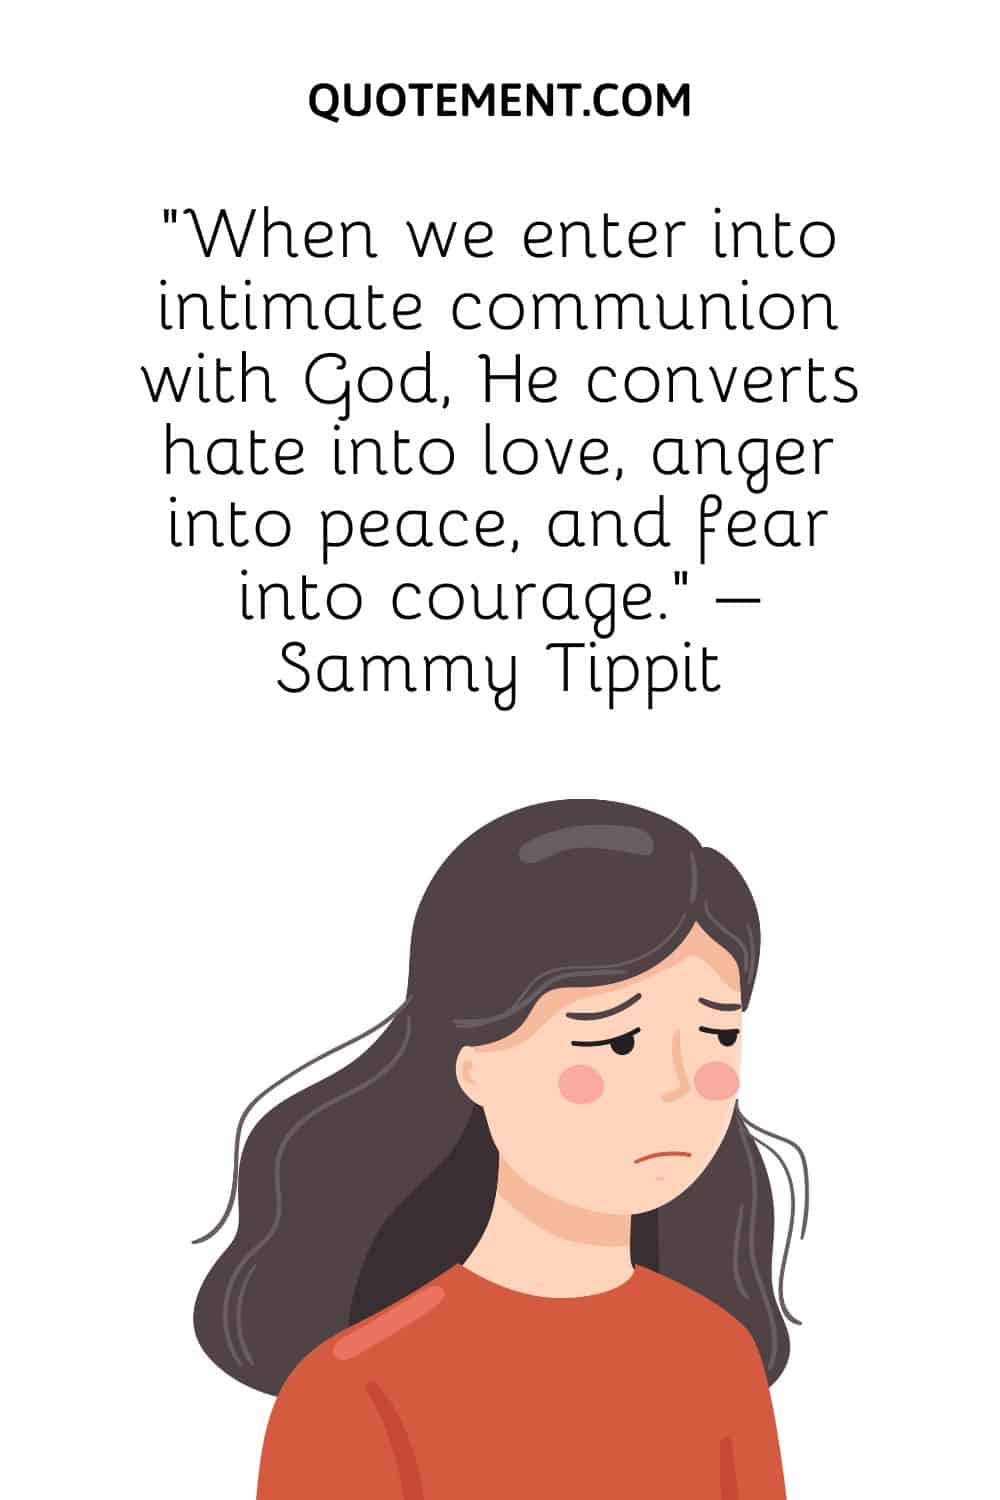 “When we enter into intimate communion with God, He converts hate into love, anger into peace, and fear into courage.” – Sammy Tippit